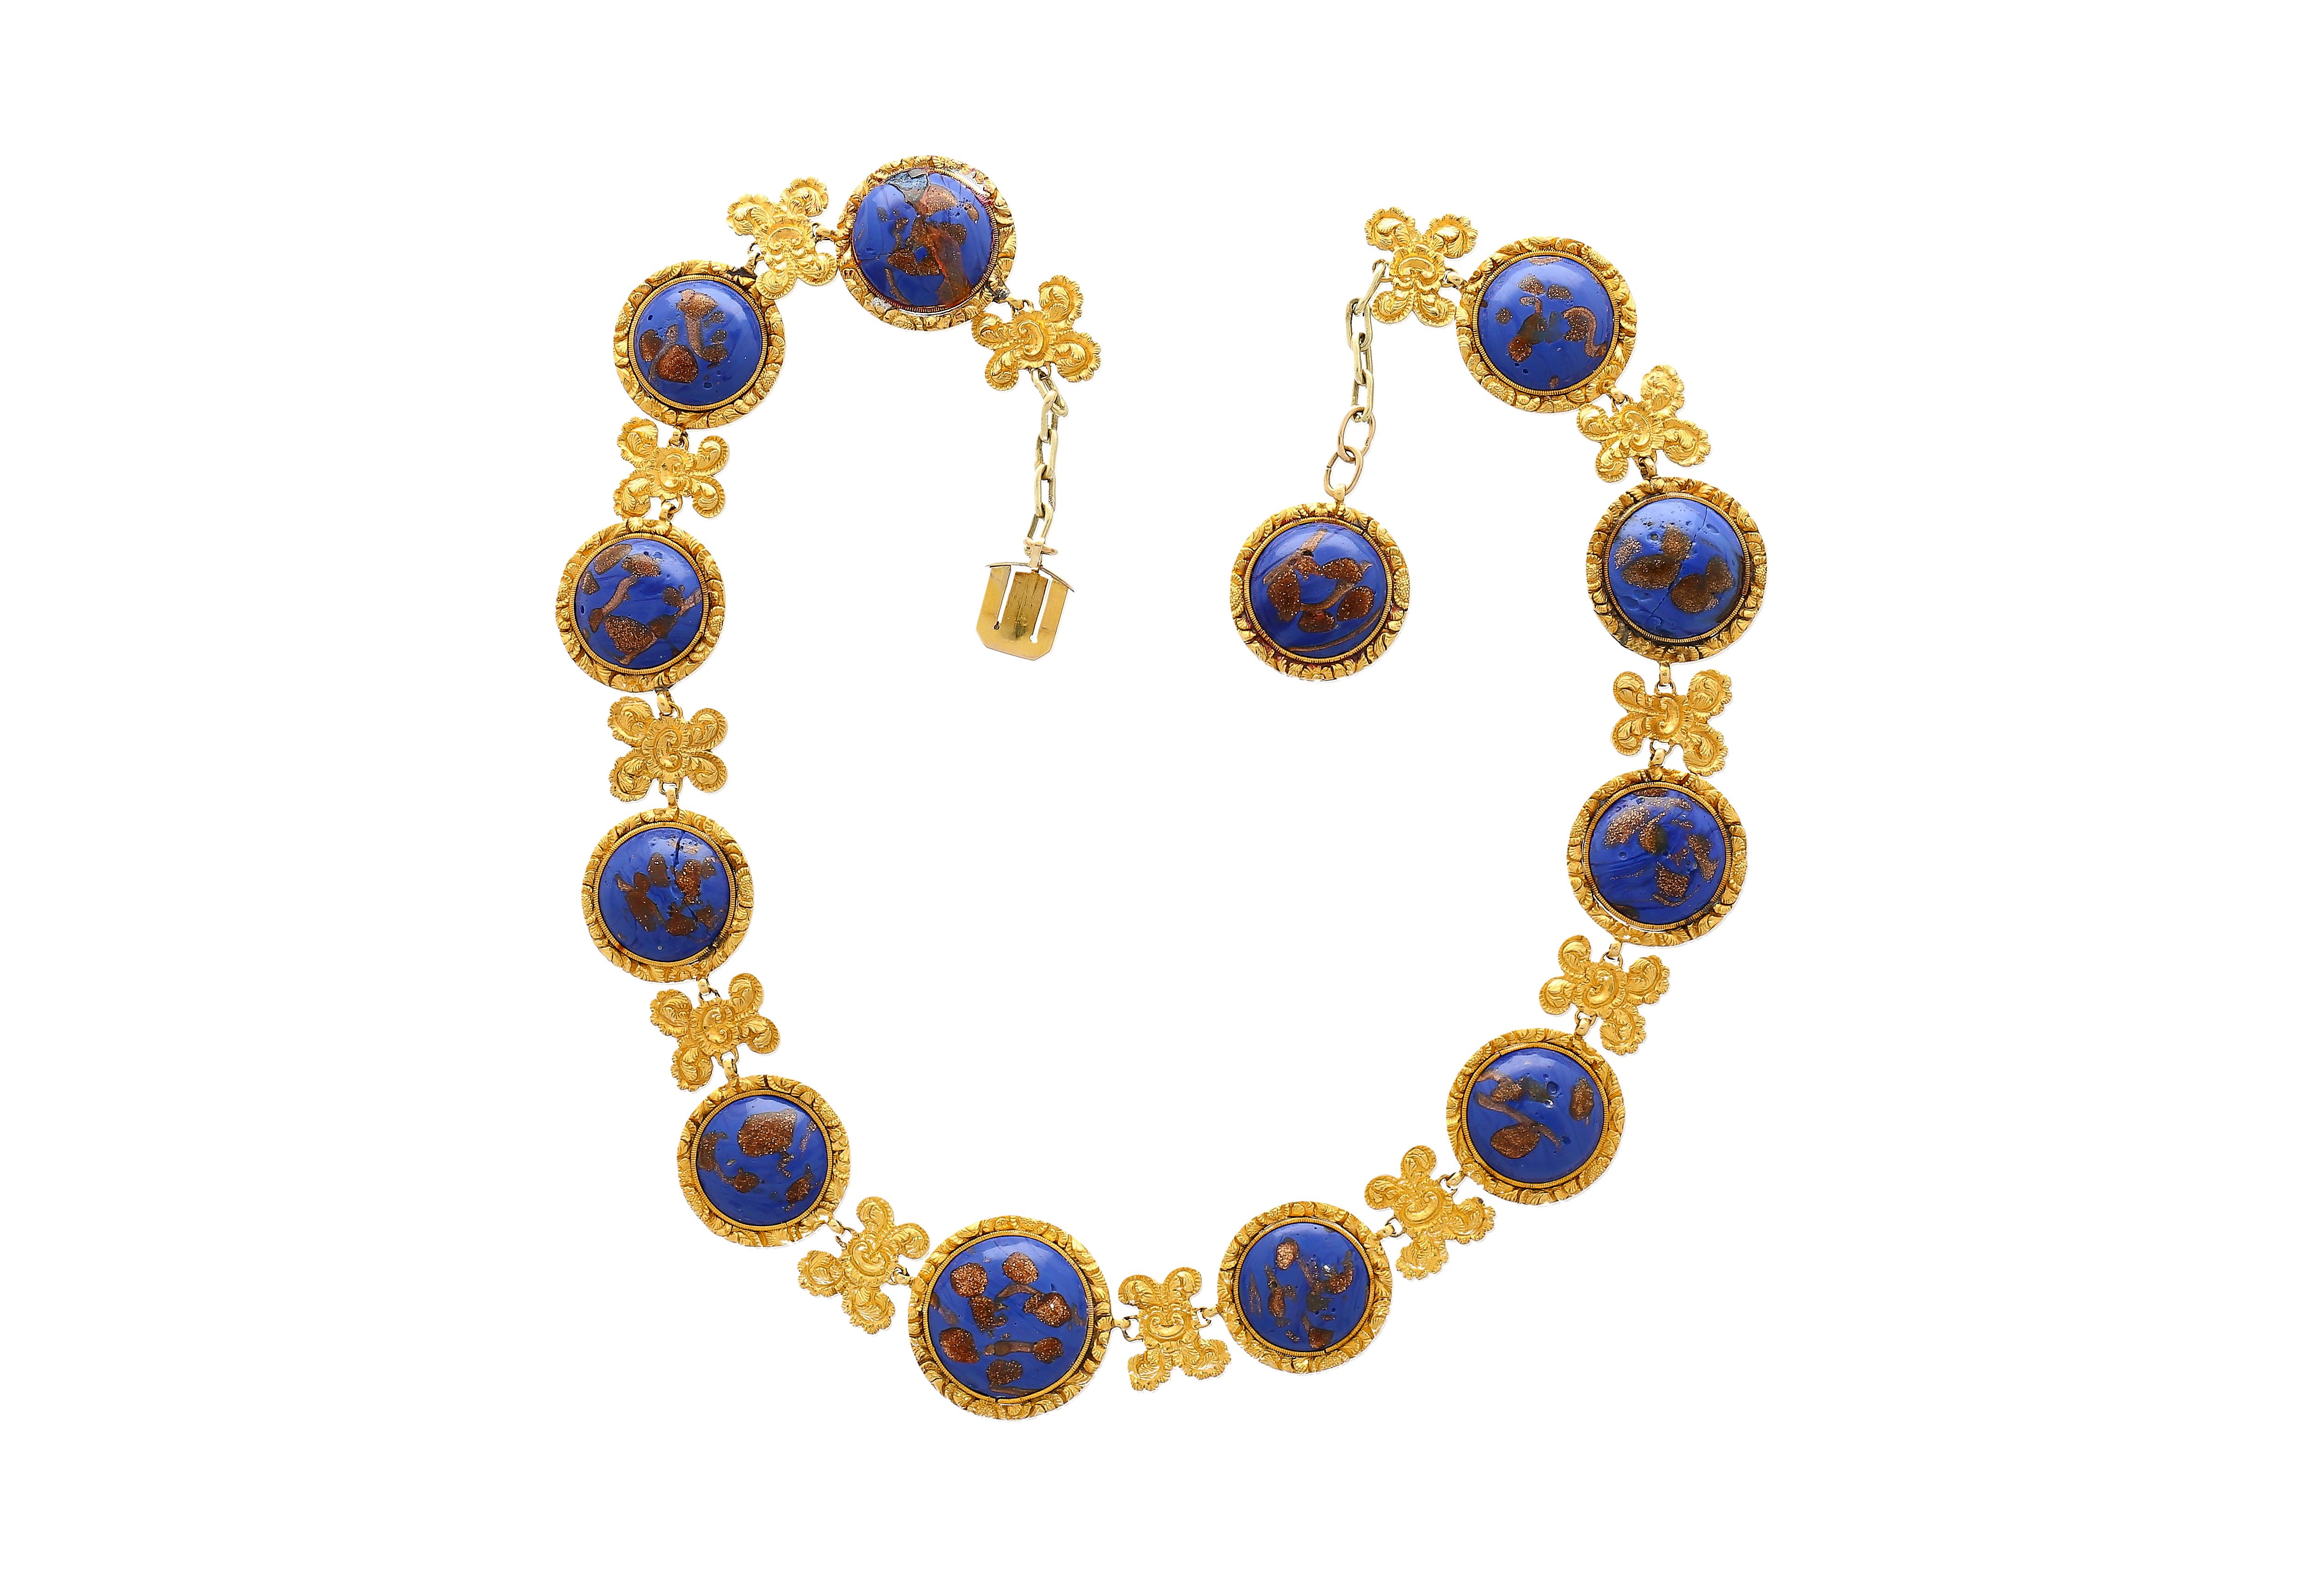 Lapis Necklace in 14k & 18K Gold. 

This Riviera styled necklace features 12 cabochon-cut lapis gemstones, each measuring 19–16 mm, and exhibits gold detailing within each stone, enhancing the royal blue hue. The necklace is crafted from 14K & 18K